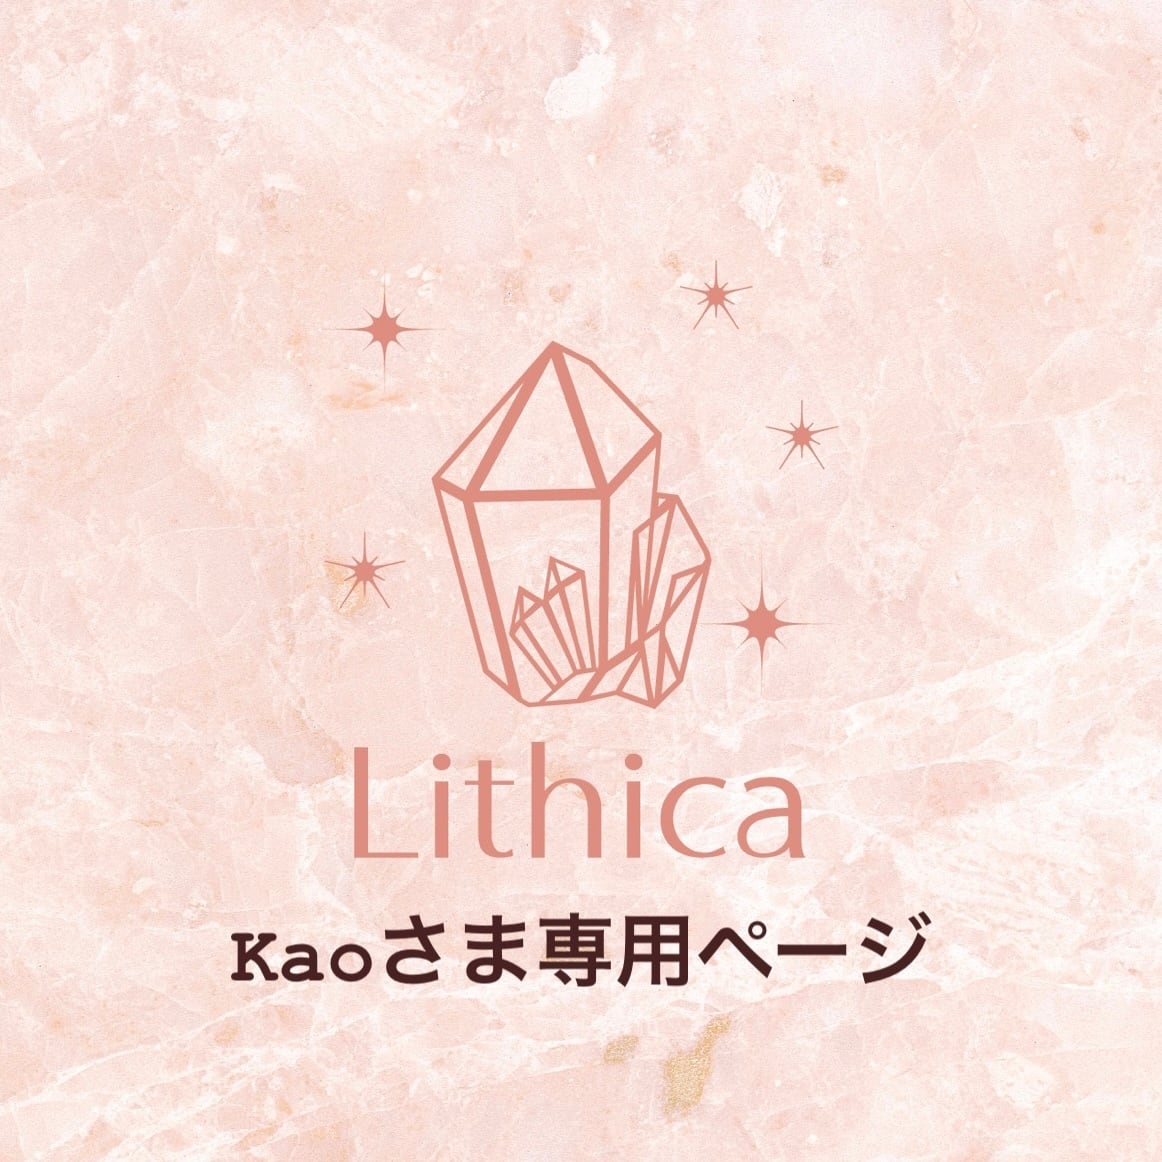 Kaoさま専用 | Lithica powered by BASE